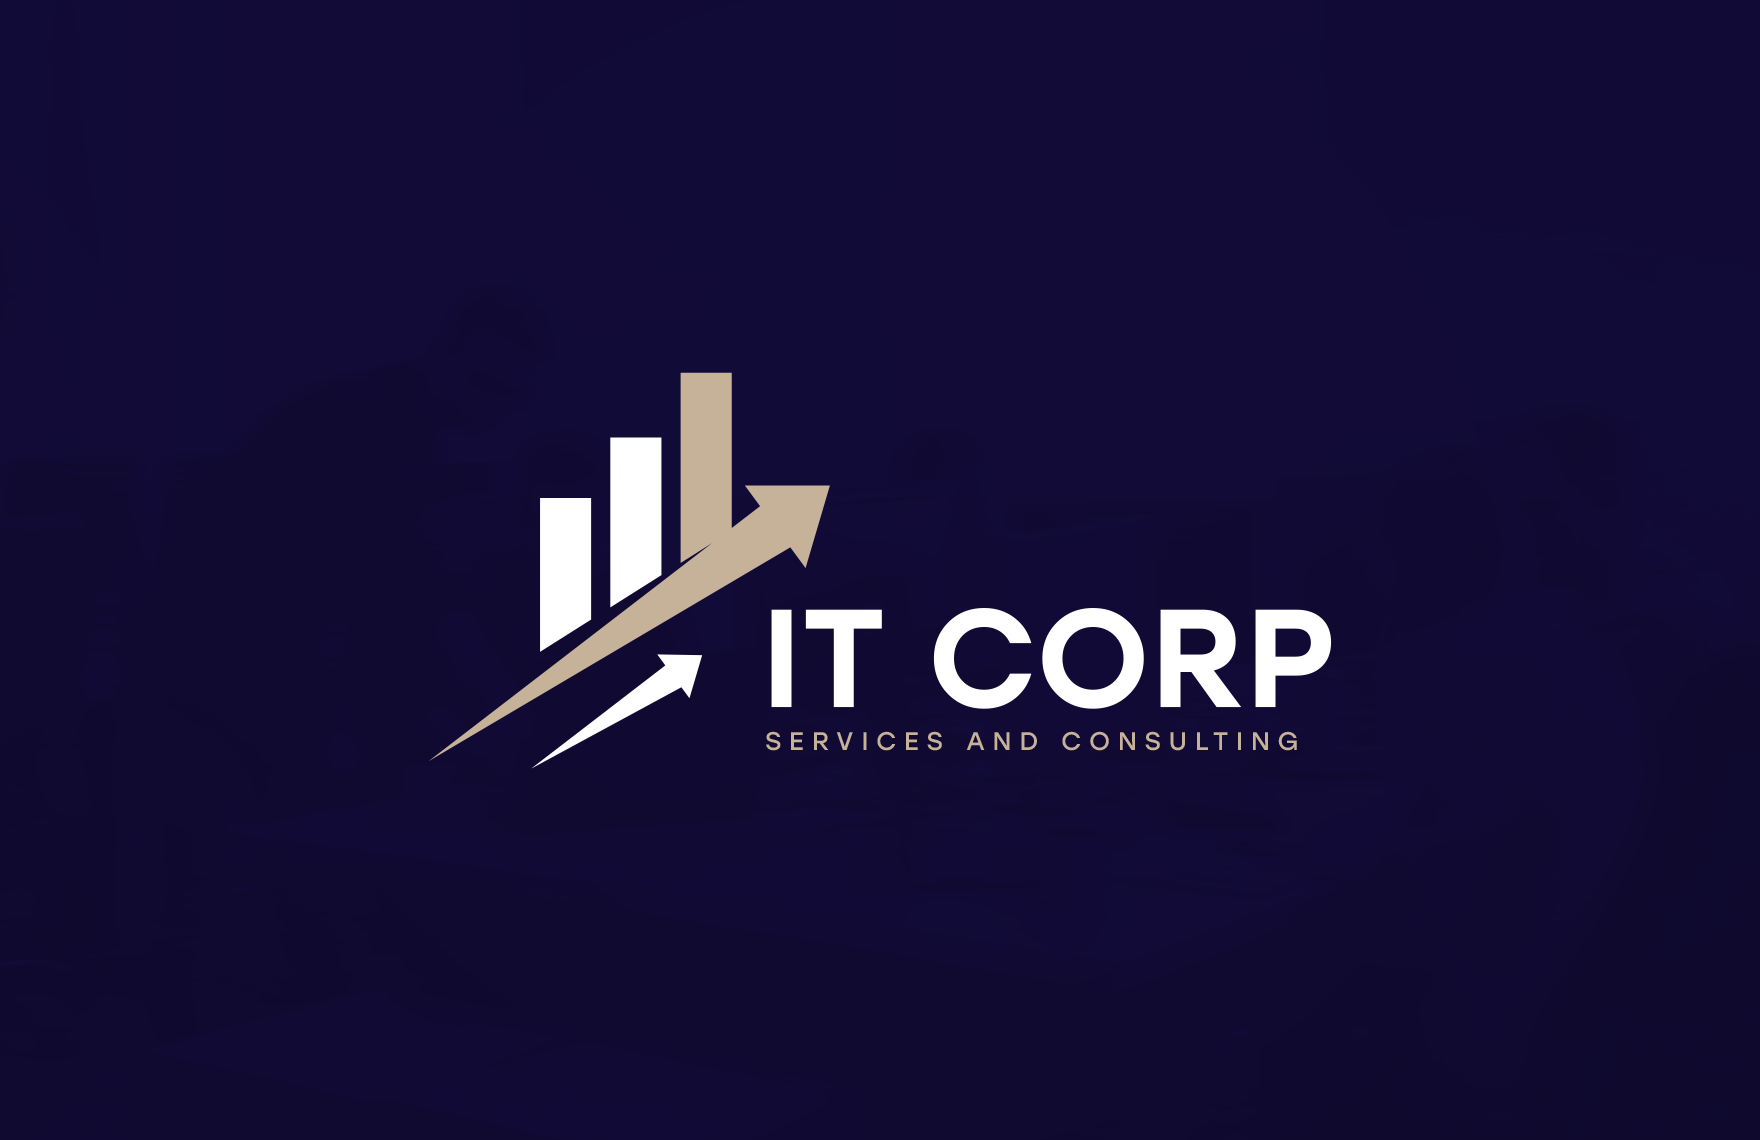 IT Fintech Consulting Logo Template in Word, Illustrator, PSD, SVG, PNG